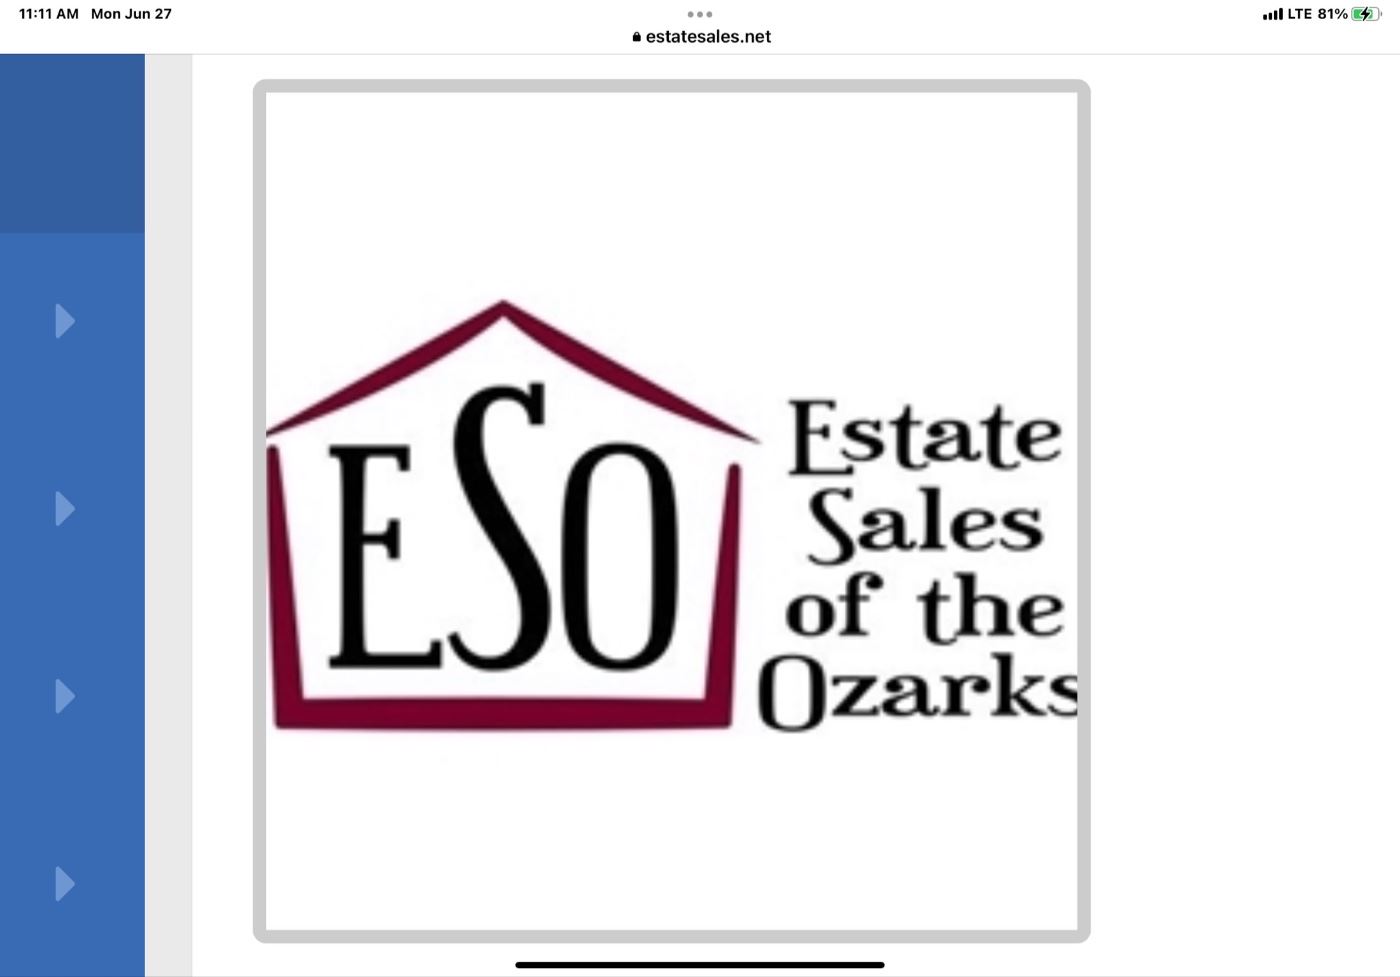 E S O or Estate Sales of the Ozarks - SPRINGFIELD’S Number One Estate Sale Company